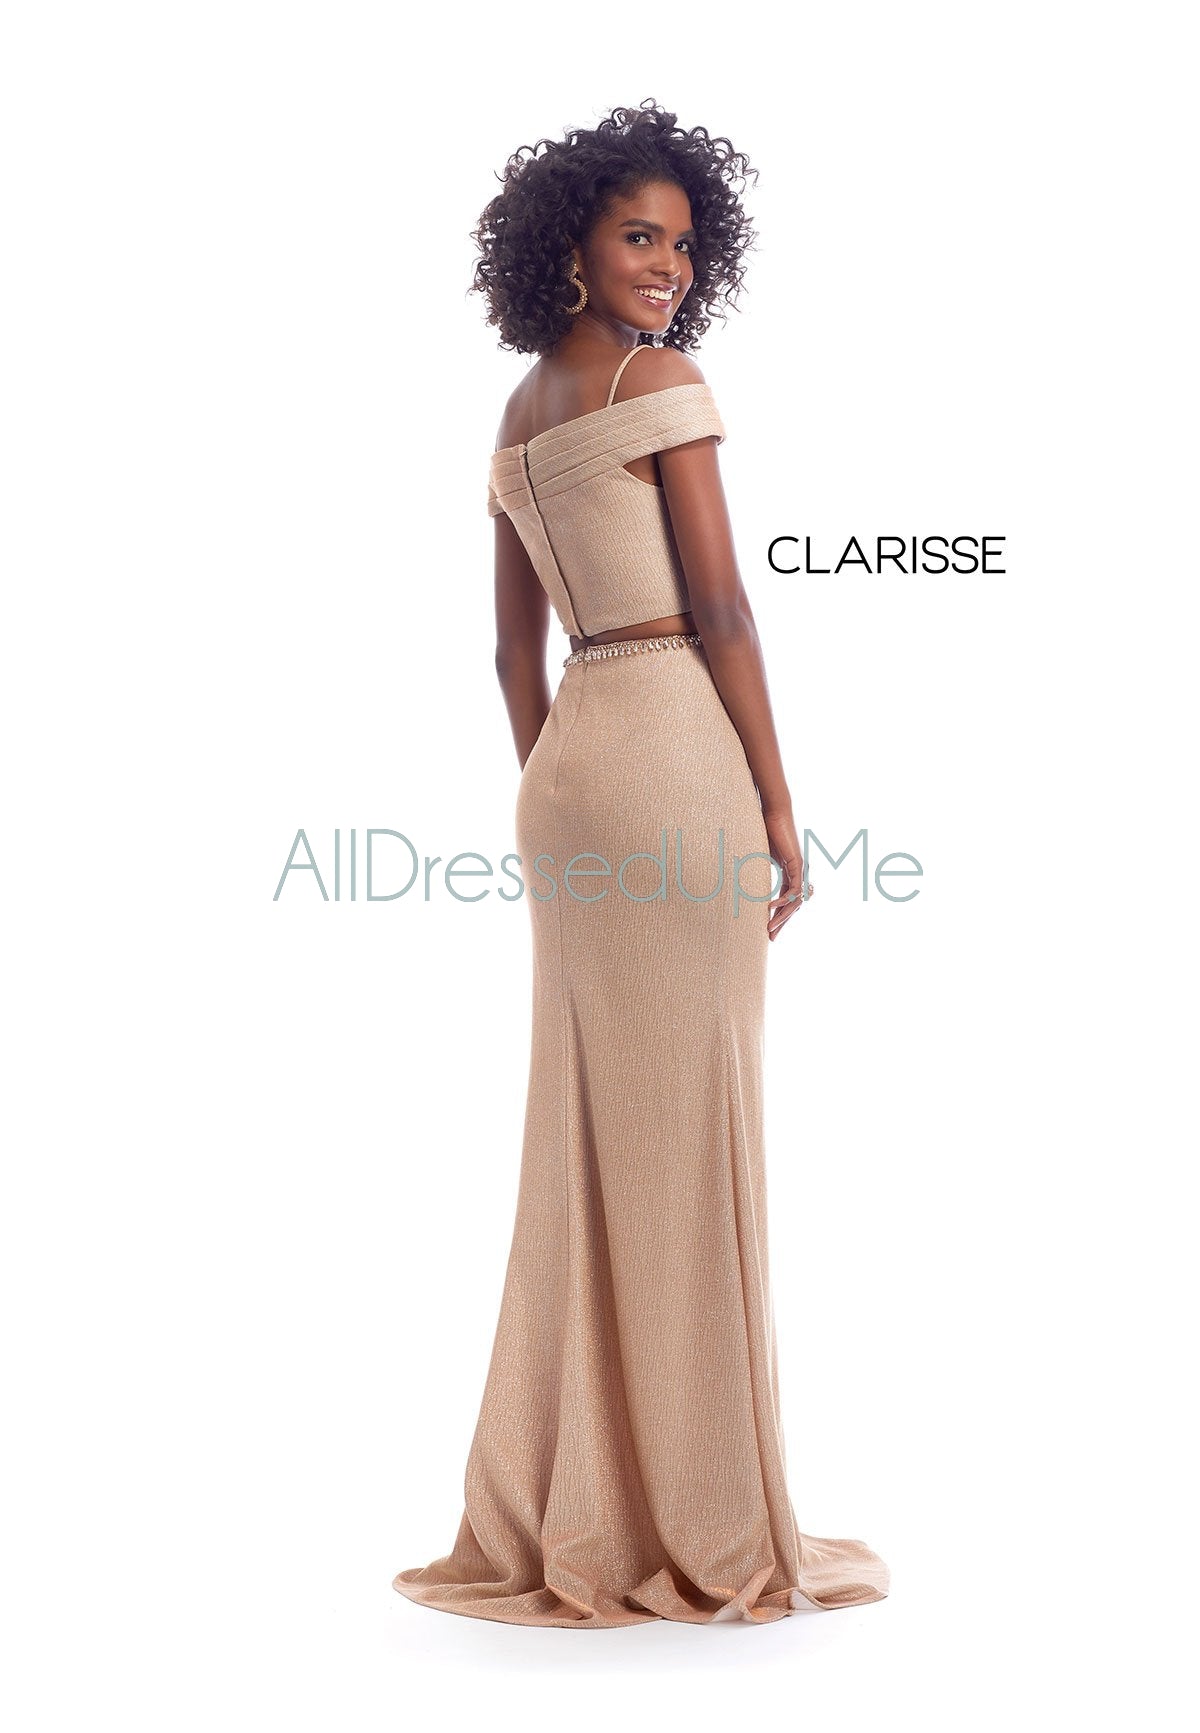 Clarisse - 8148 - All Dressed Up, Prom/Party Dress - 14 - Dresses Two Piece Cut Out Sweetheart Halter Low Back High Neck Print Beaded Chiffon Jersey Fitted Sexy Satin Lace Jeweled Sparkle Shimmer Sleeveless Stunning Gorgeous Modest See Through Transparent Glitter Special Occasions Event Chattanooga Hixson Shops Boutiques Tennessee TN Georgia GA MSRP Lowest Prices Sale Discount